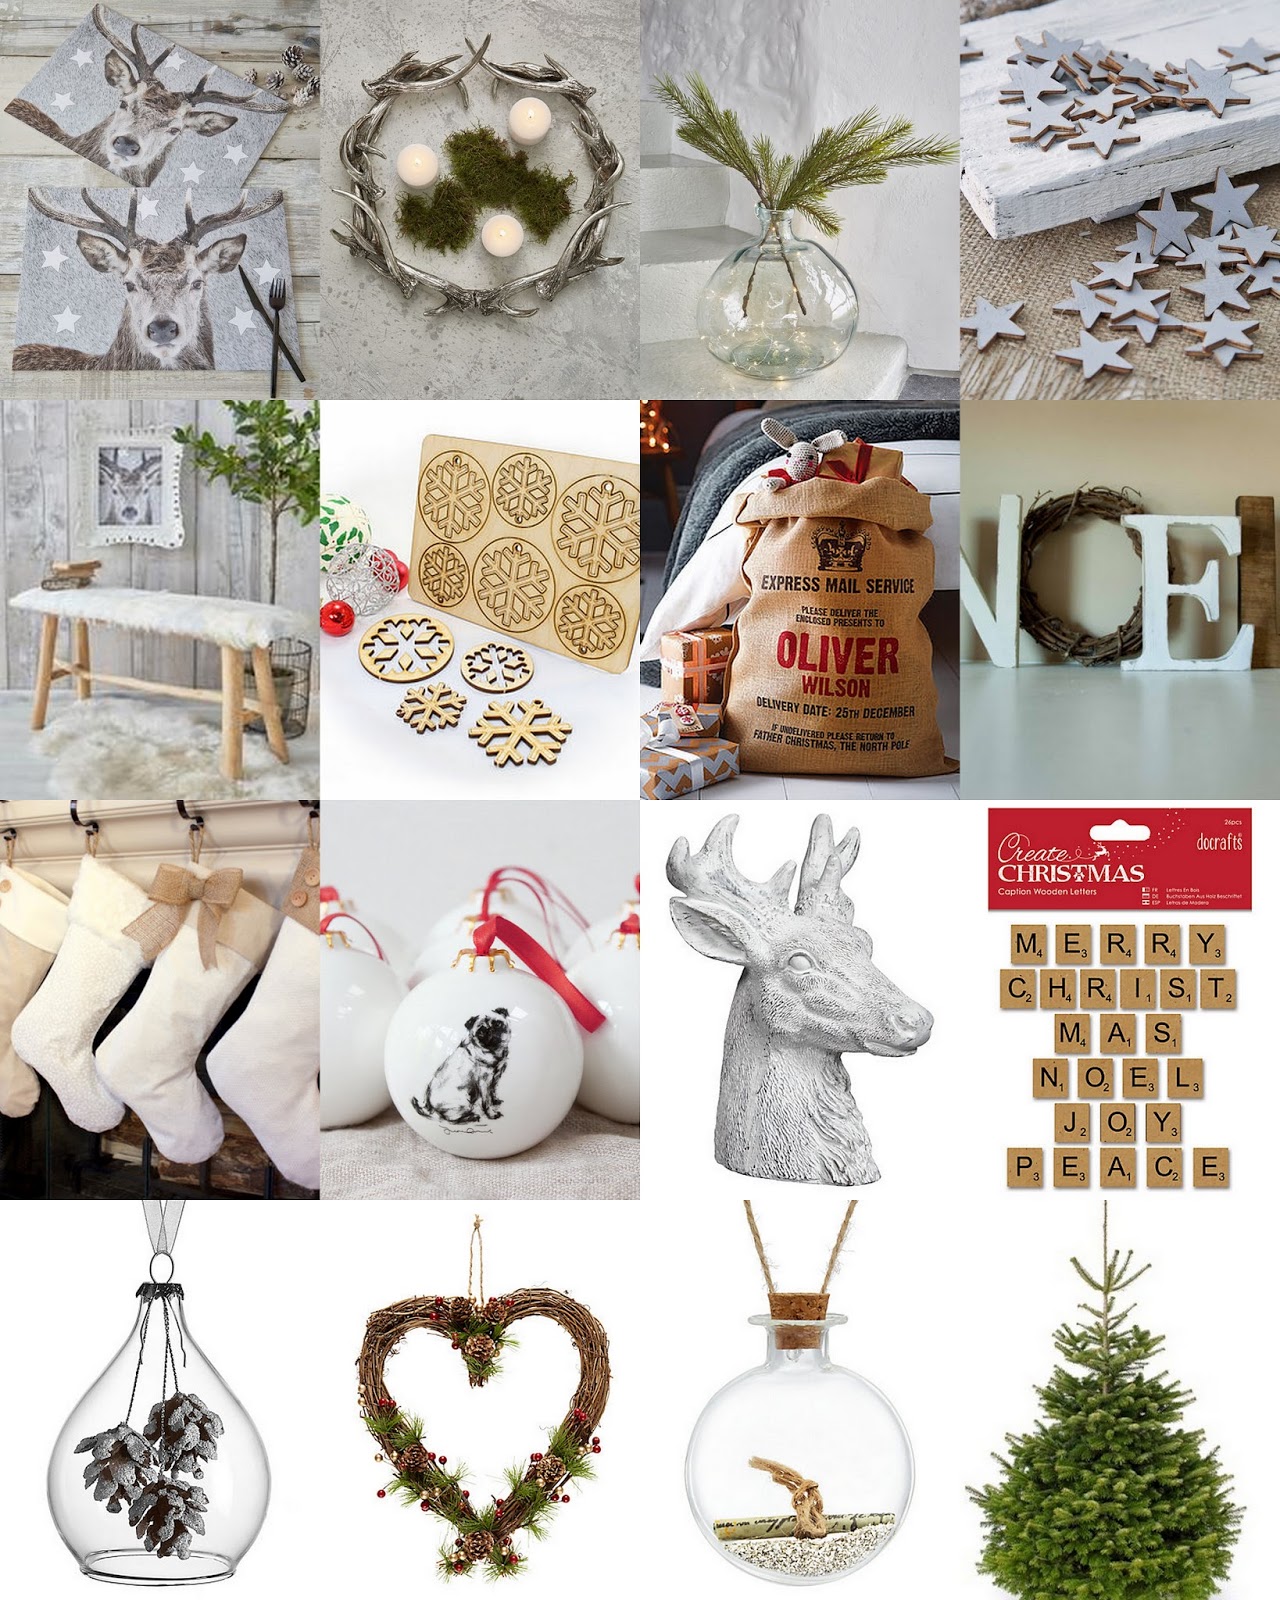 Beauty and the Blogger: A Rustic Christmas